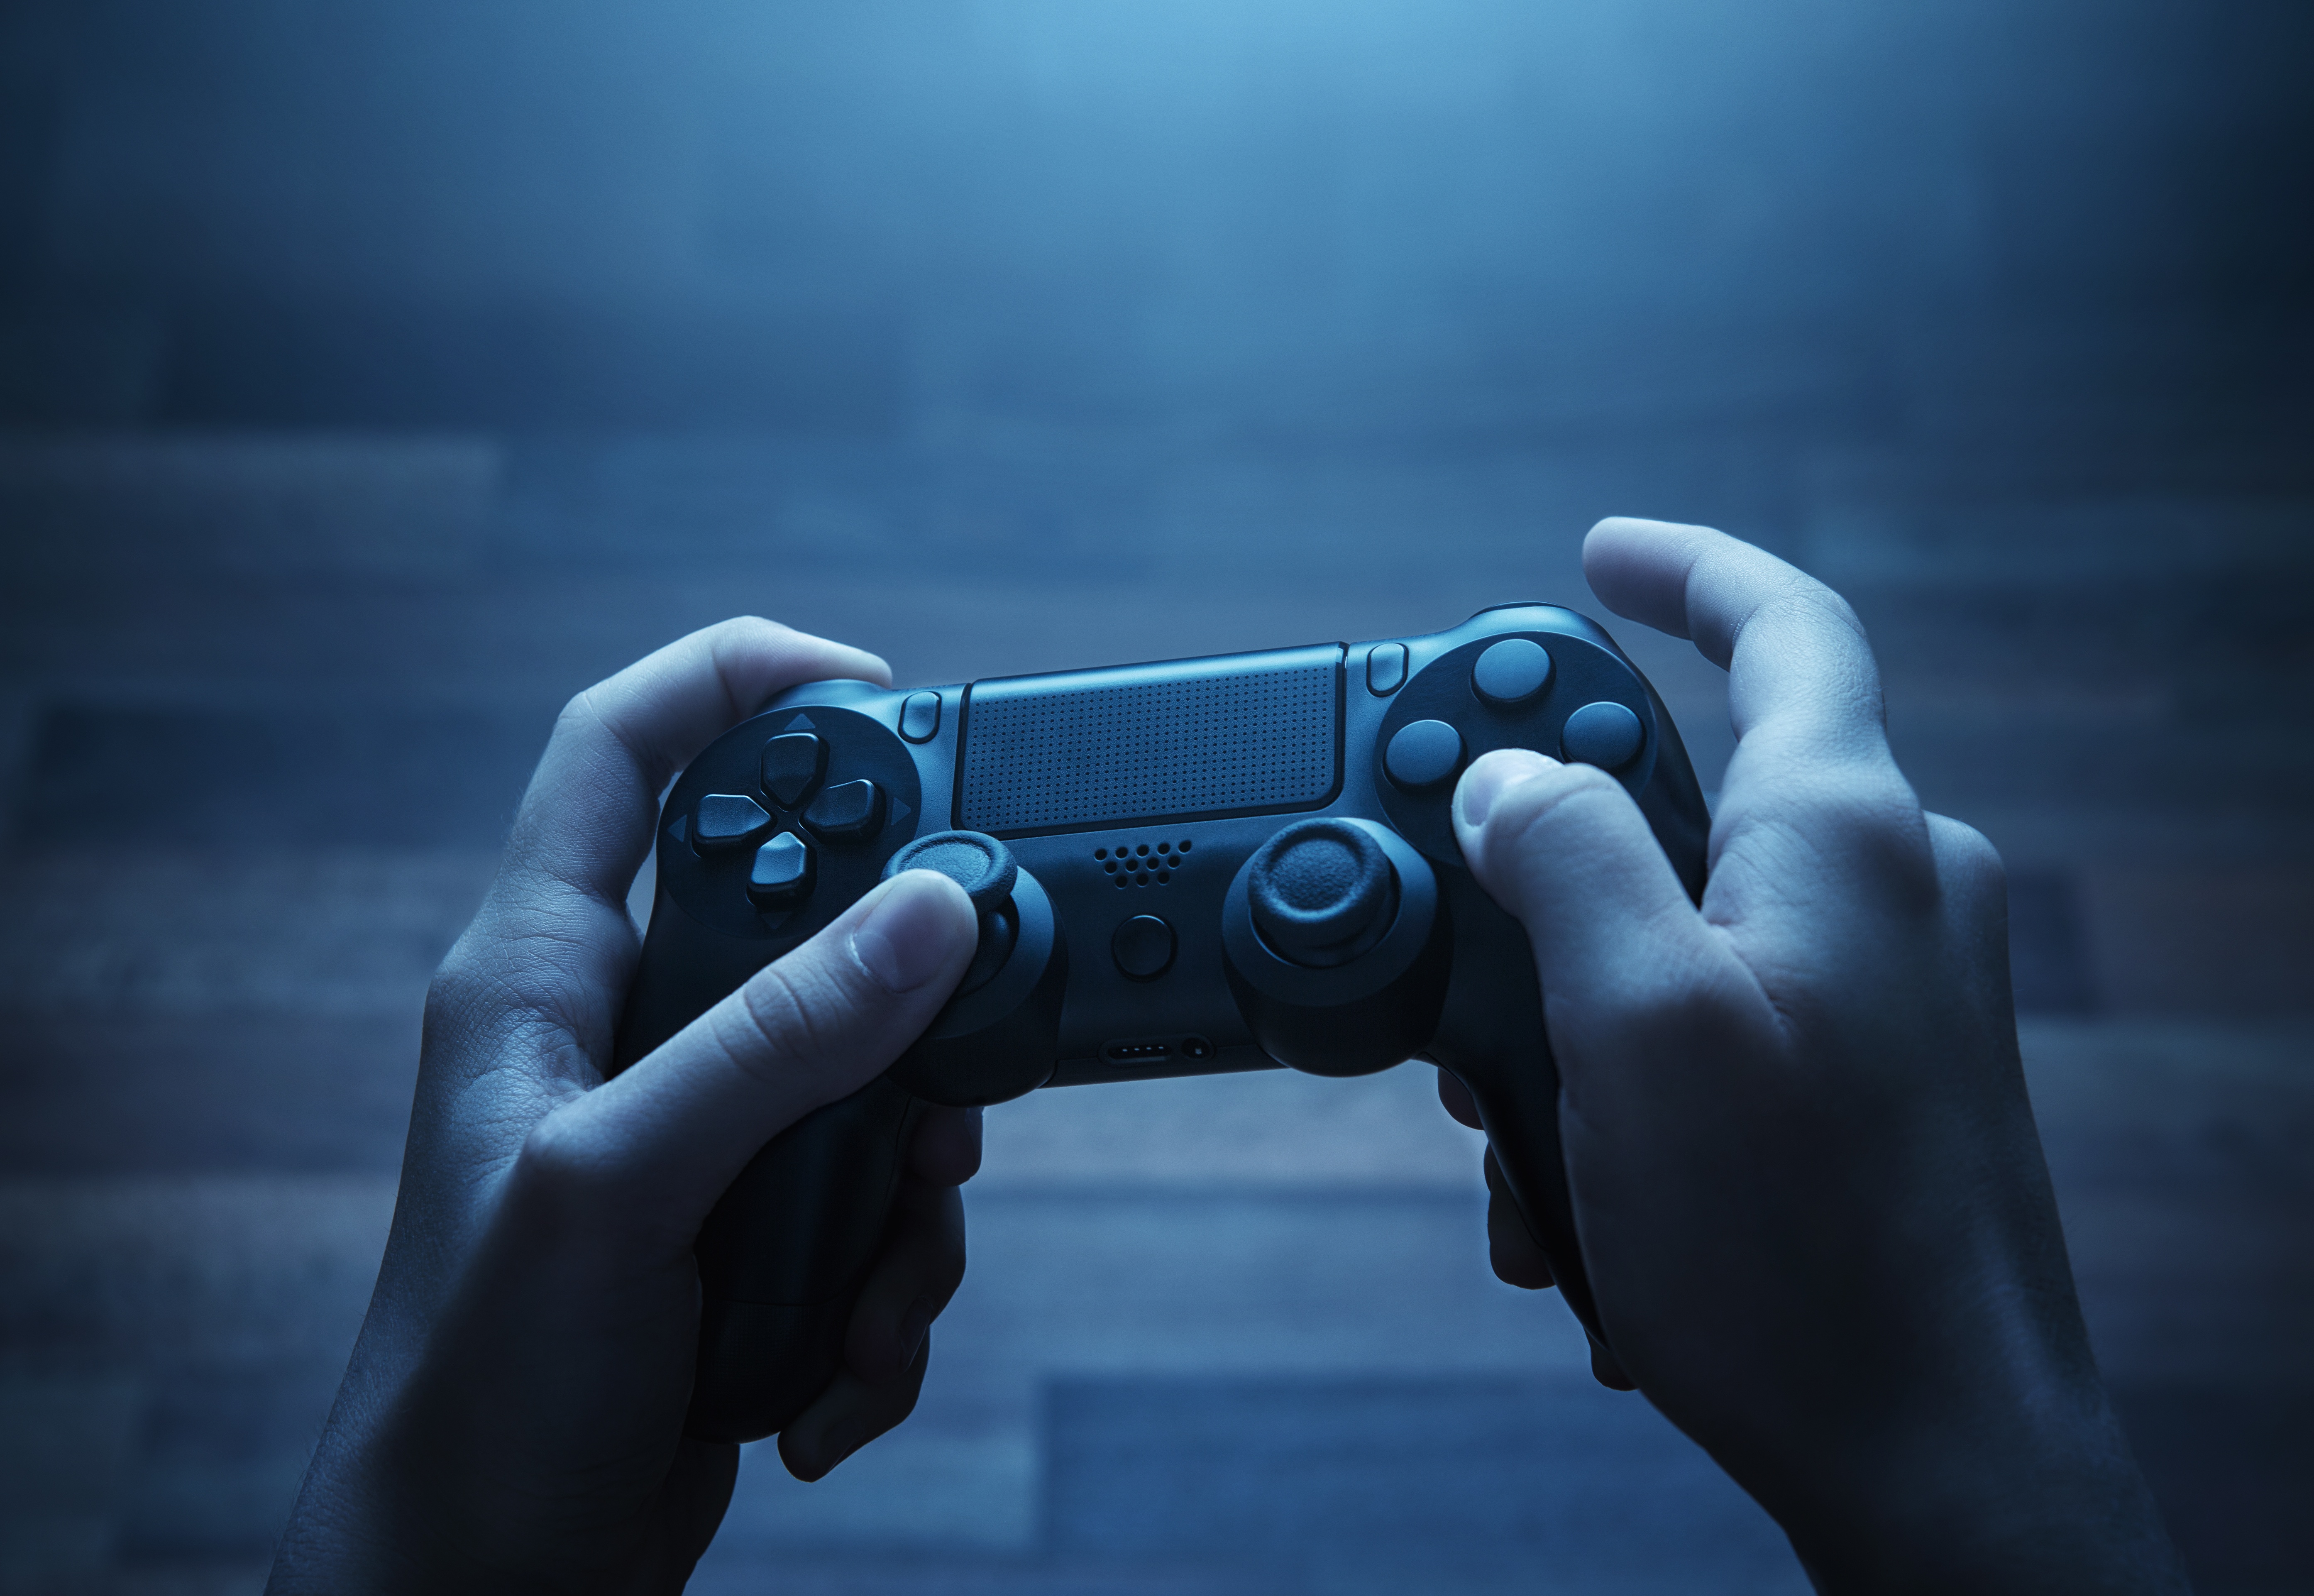 Close-up of a pair of hands holding a gaming console.